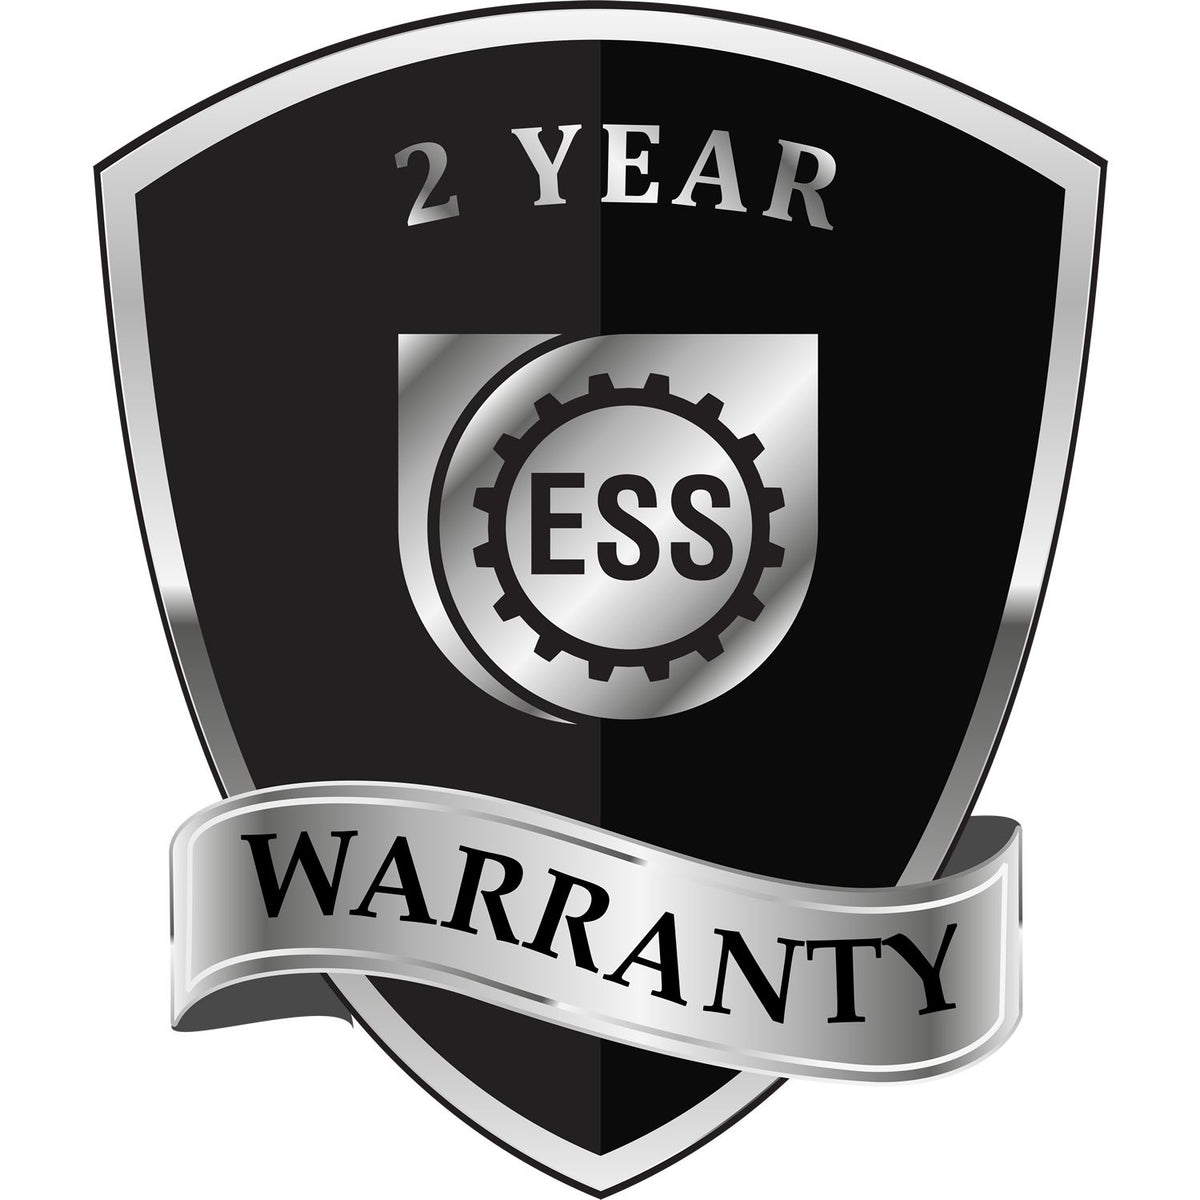 A black and silver badge or emblem showing warranty information for the Gift South Carolina Engineer Seal